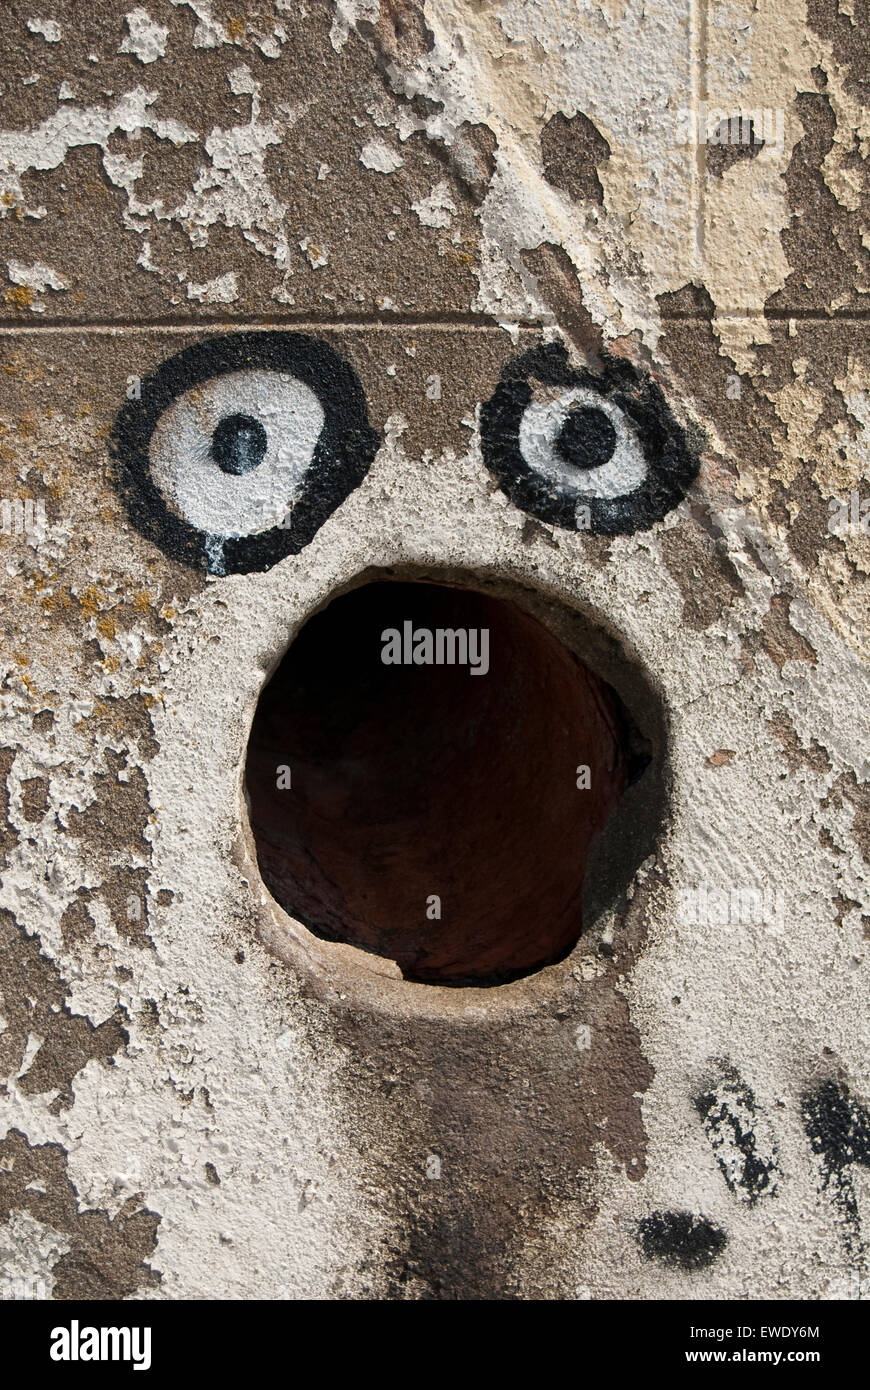 Street art - graffiti around a hole in a wall to help create a face with a big mouth Stock Photo